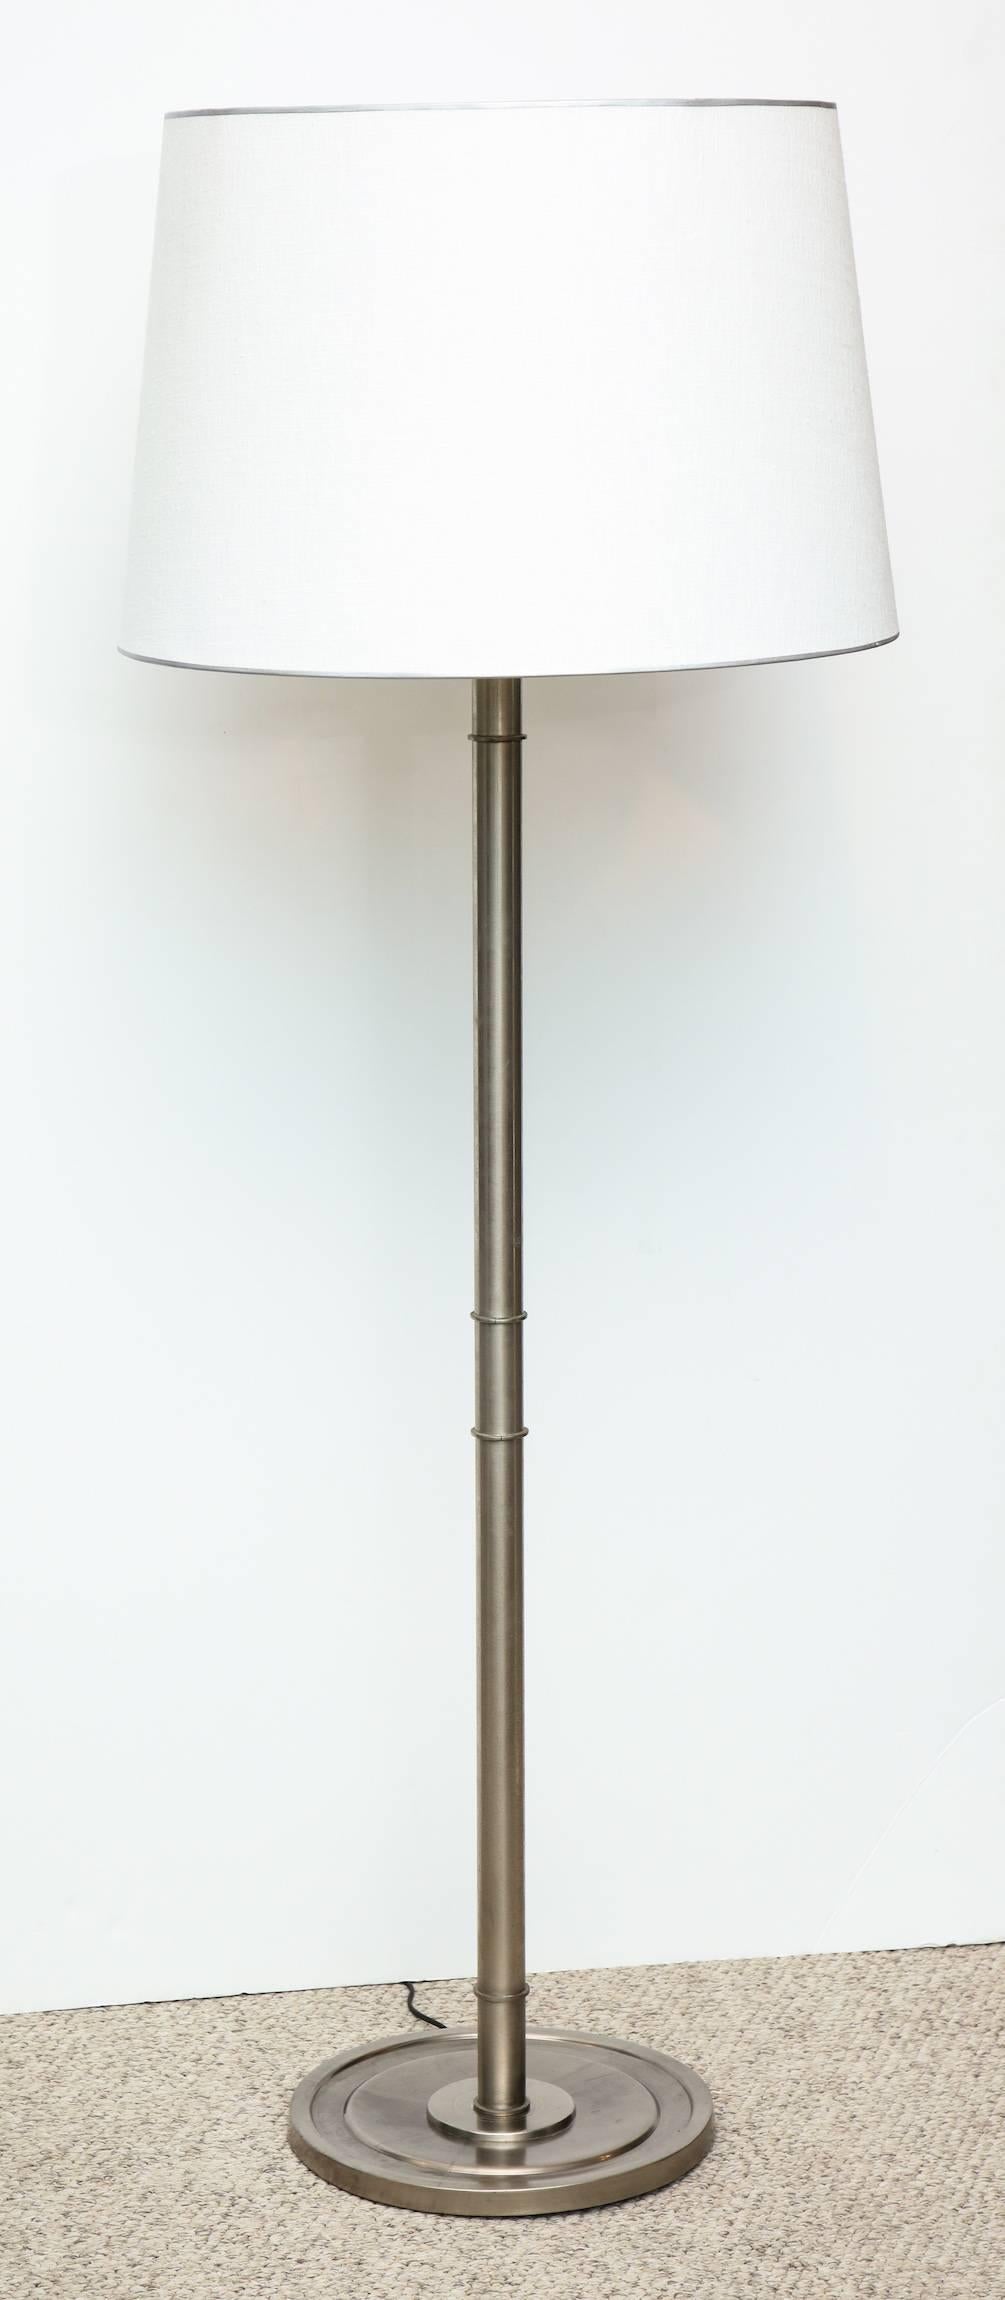 Custom designed floor lamp by Paul László. Pole lamp of oxidized nickel with great detailing and new linen shade. Three standard sized sockets and one large up light that takes a three -way bulb. All sockets and wiring have been recently replaced.